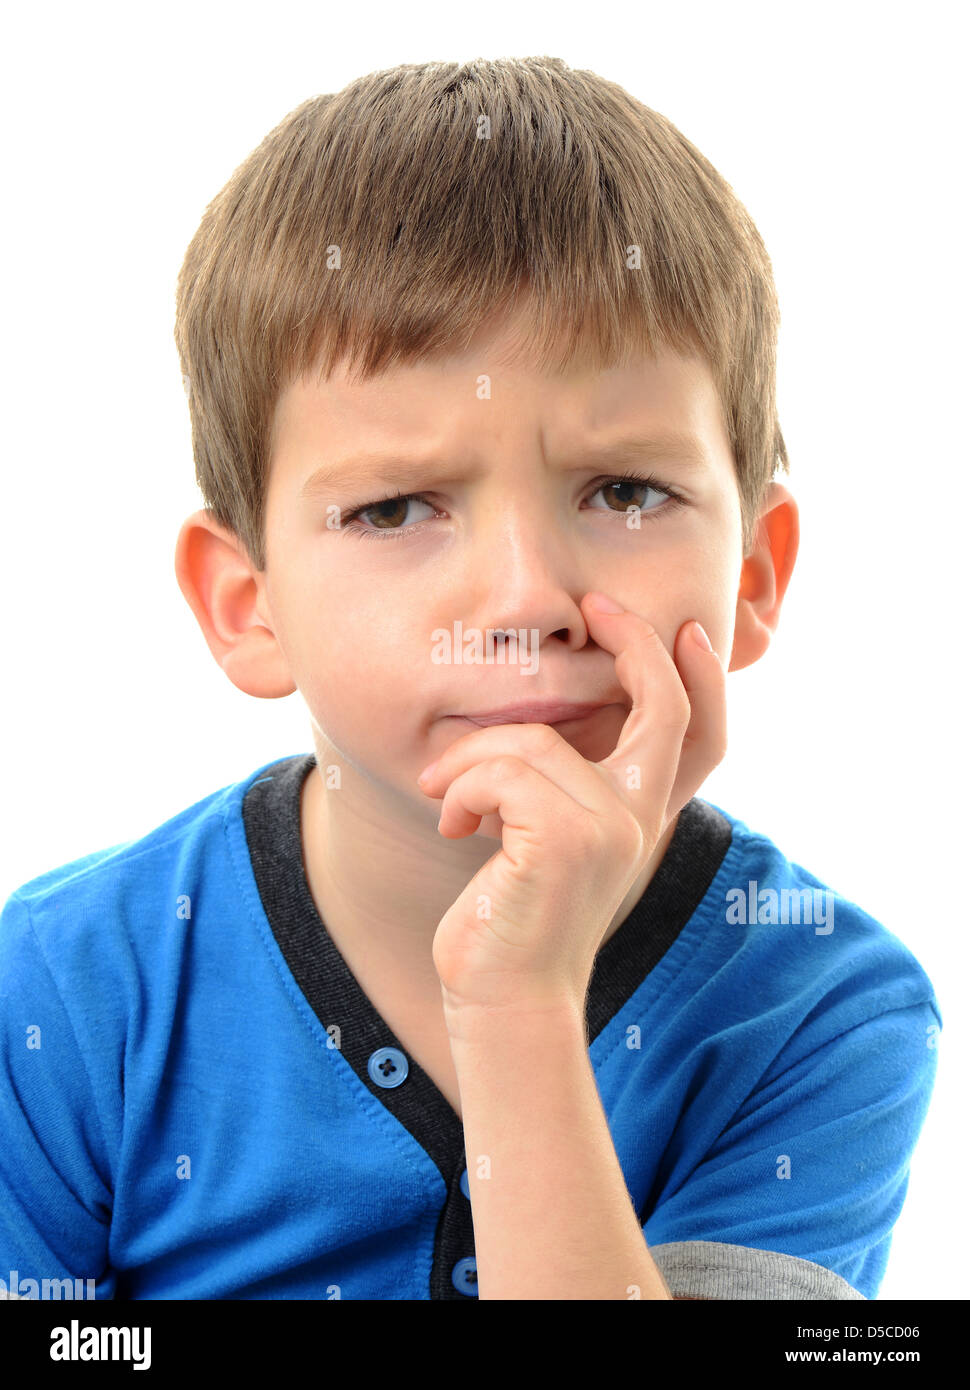 Boy looking confused, expression of confusion, confused child Stock Photo